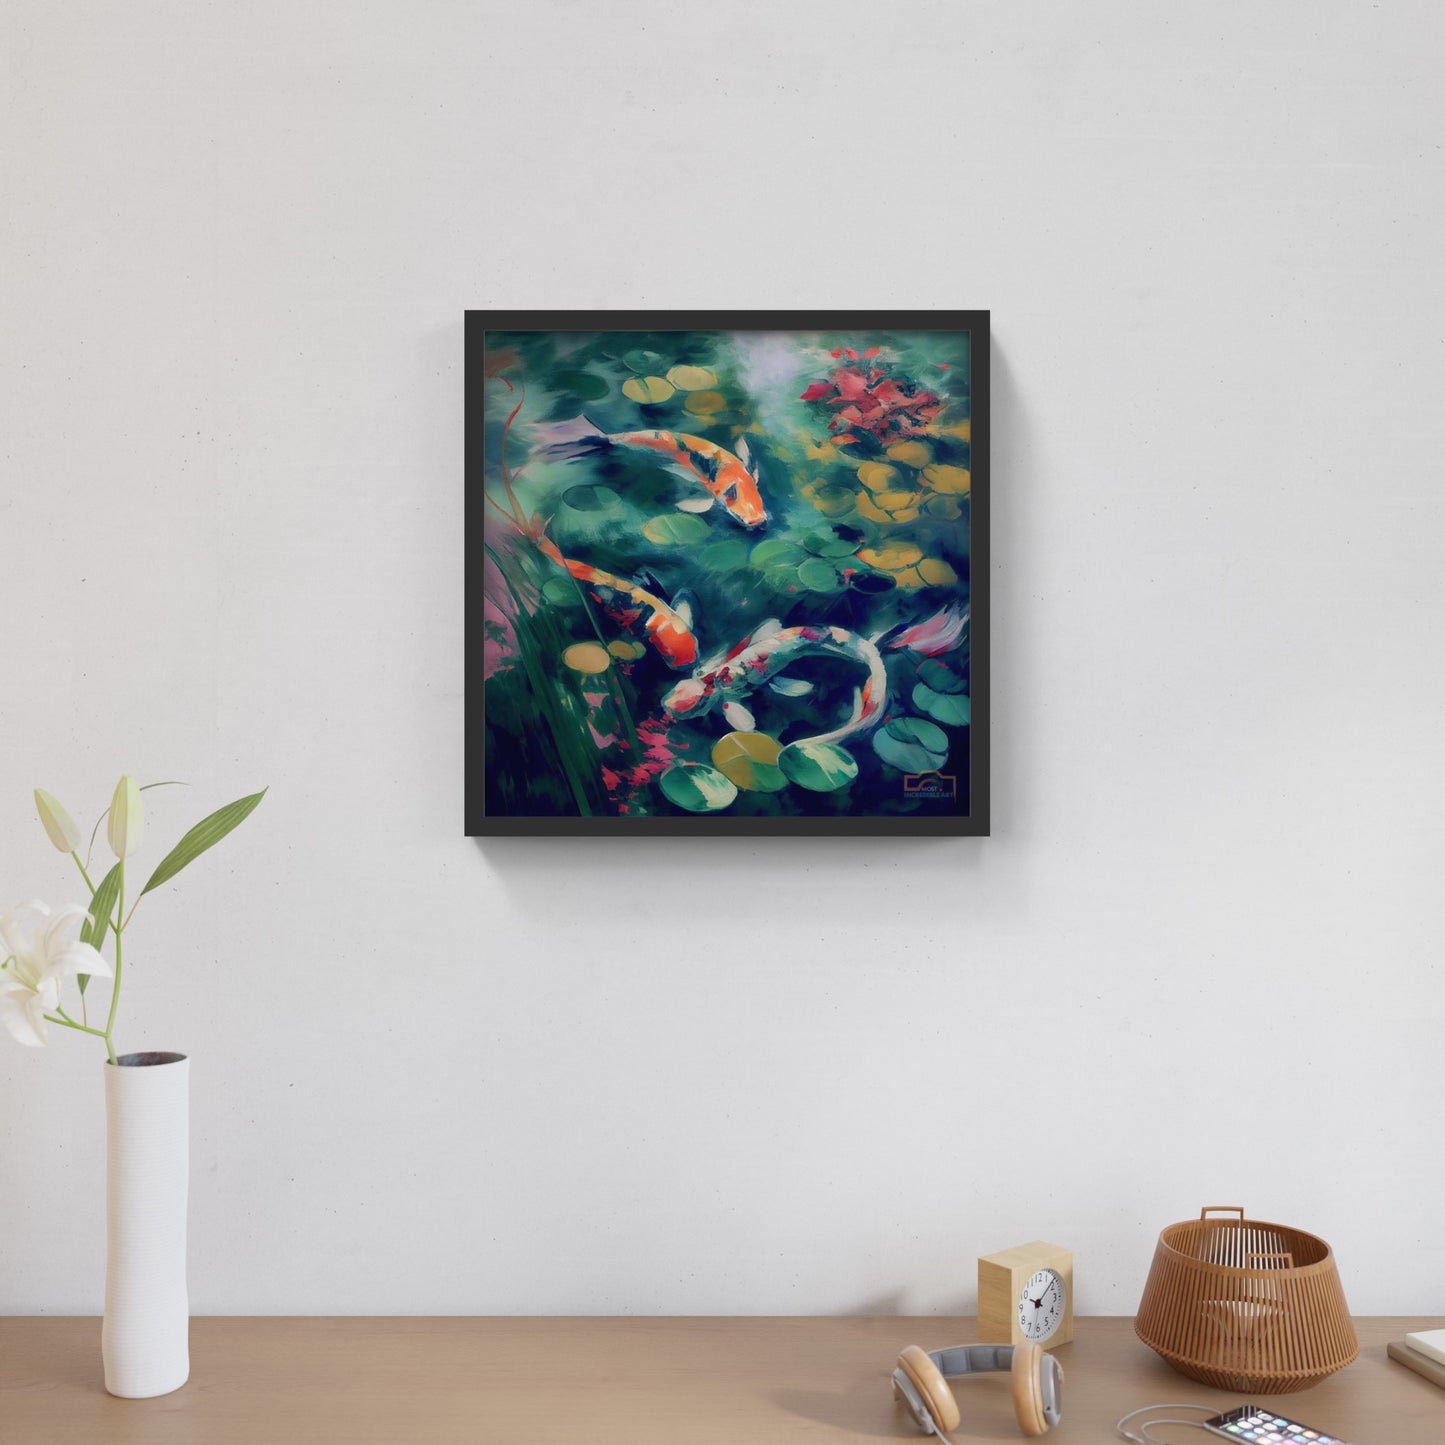 A beautiful abstract painting of a Koi pond -  Koi Art